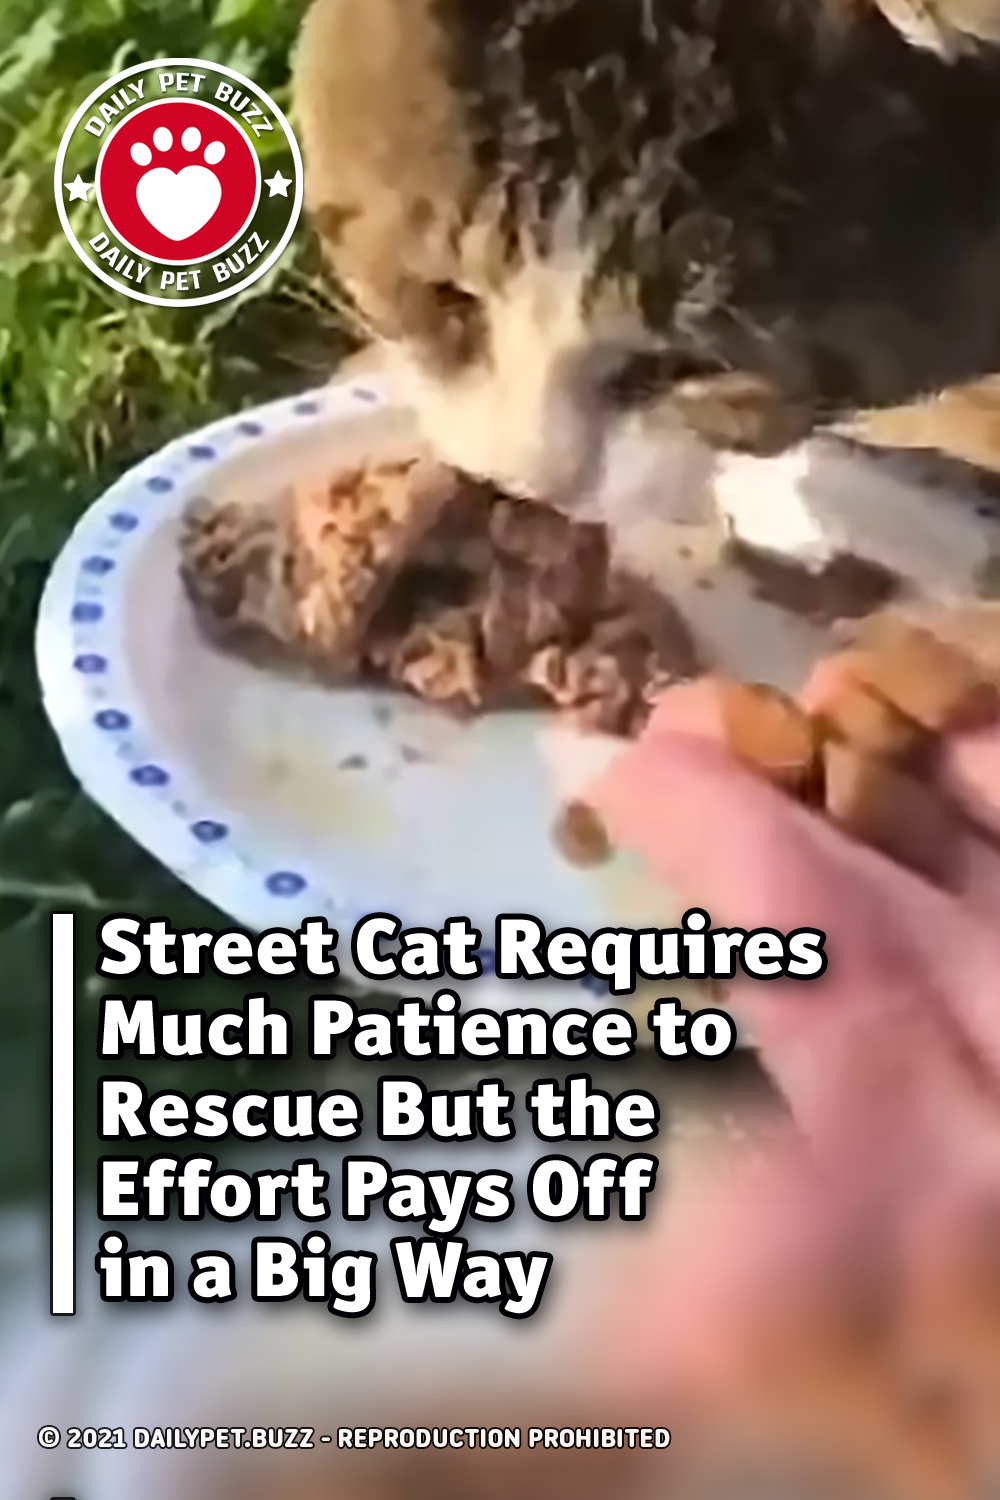 Street Cat Requires Much Patience to Rescue But the Effort Pays Off in a Big Way